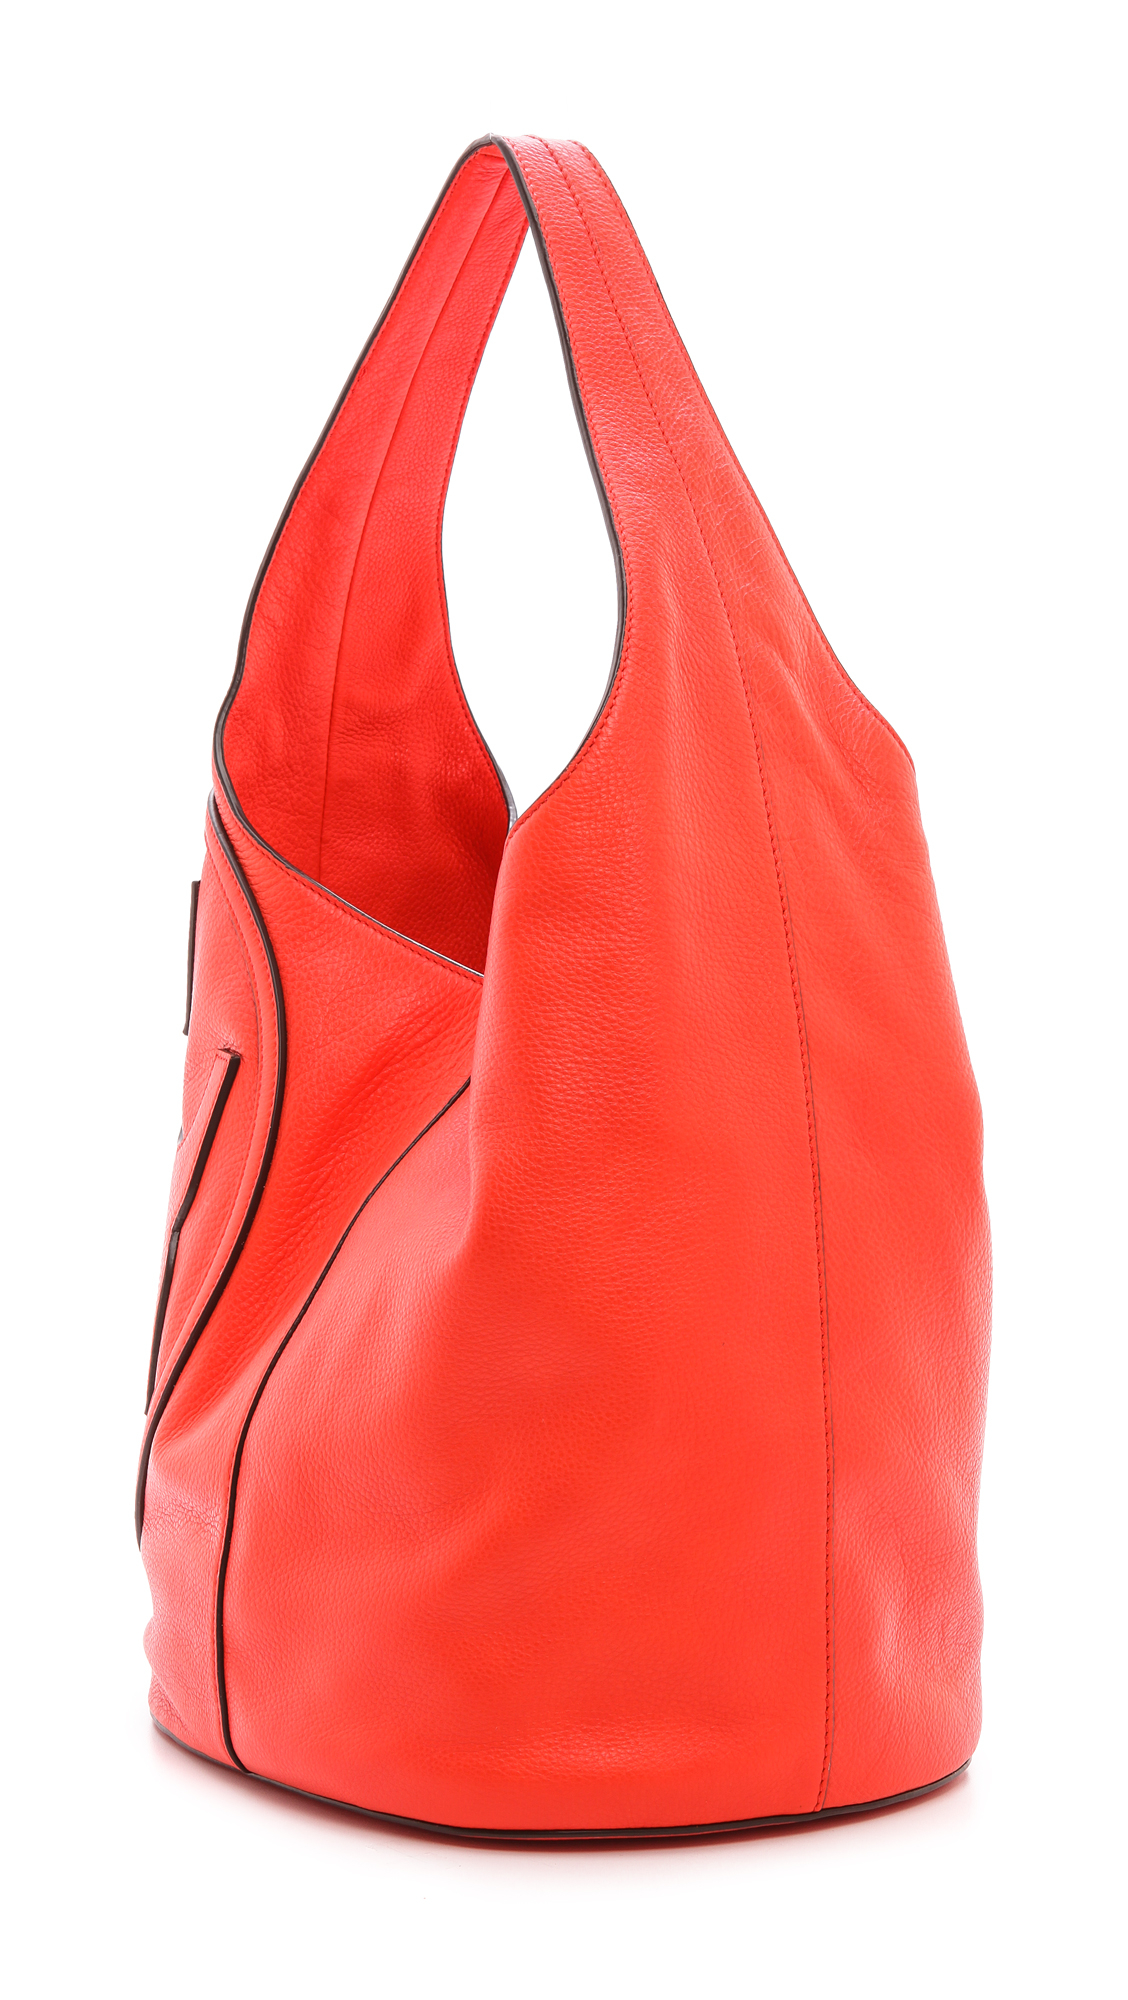 Lyst - Tory Burch All T Hobo Bag Poppy Red in Red